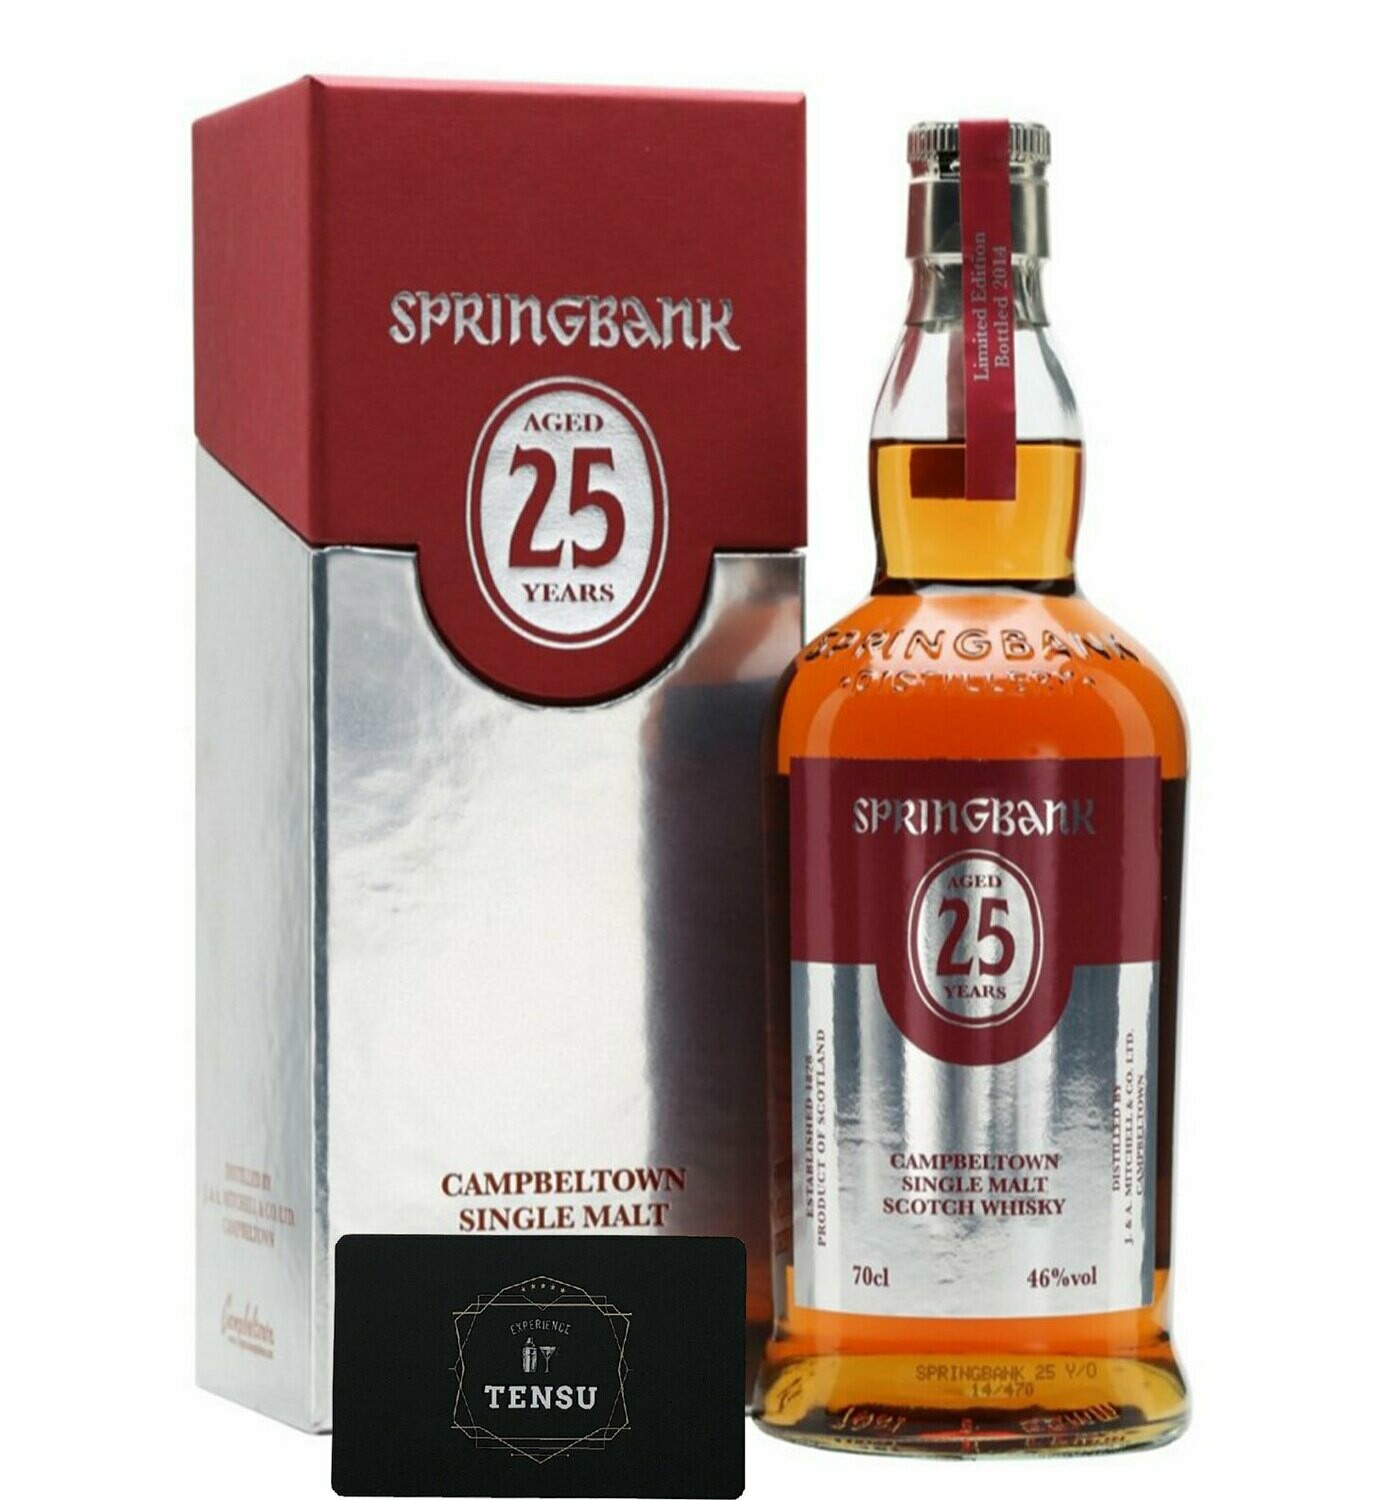 Springbank 25 Years Old 46.0 "OB"